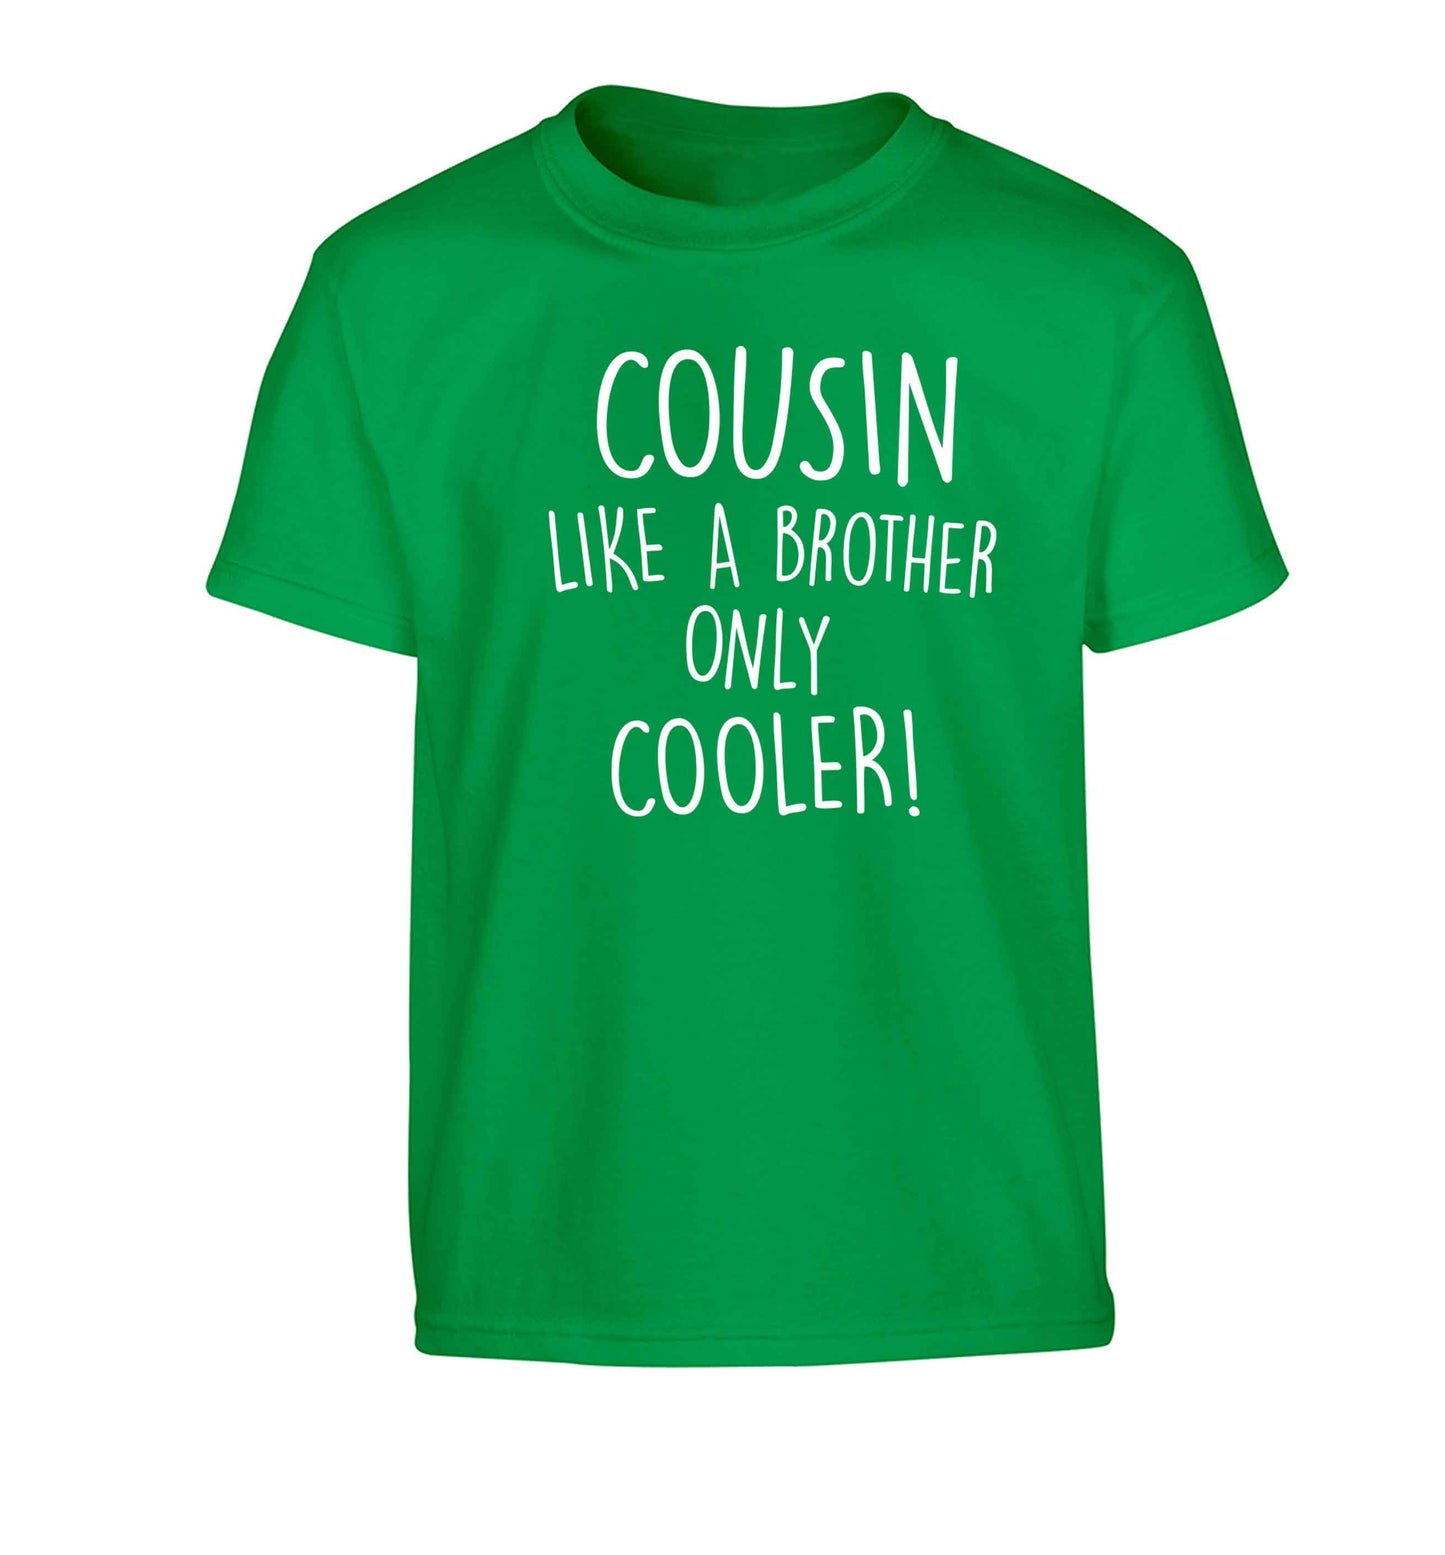 Cousin like a brother only cooler Children's green Tshirt 12-13 Years